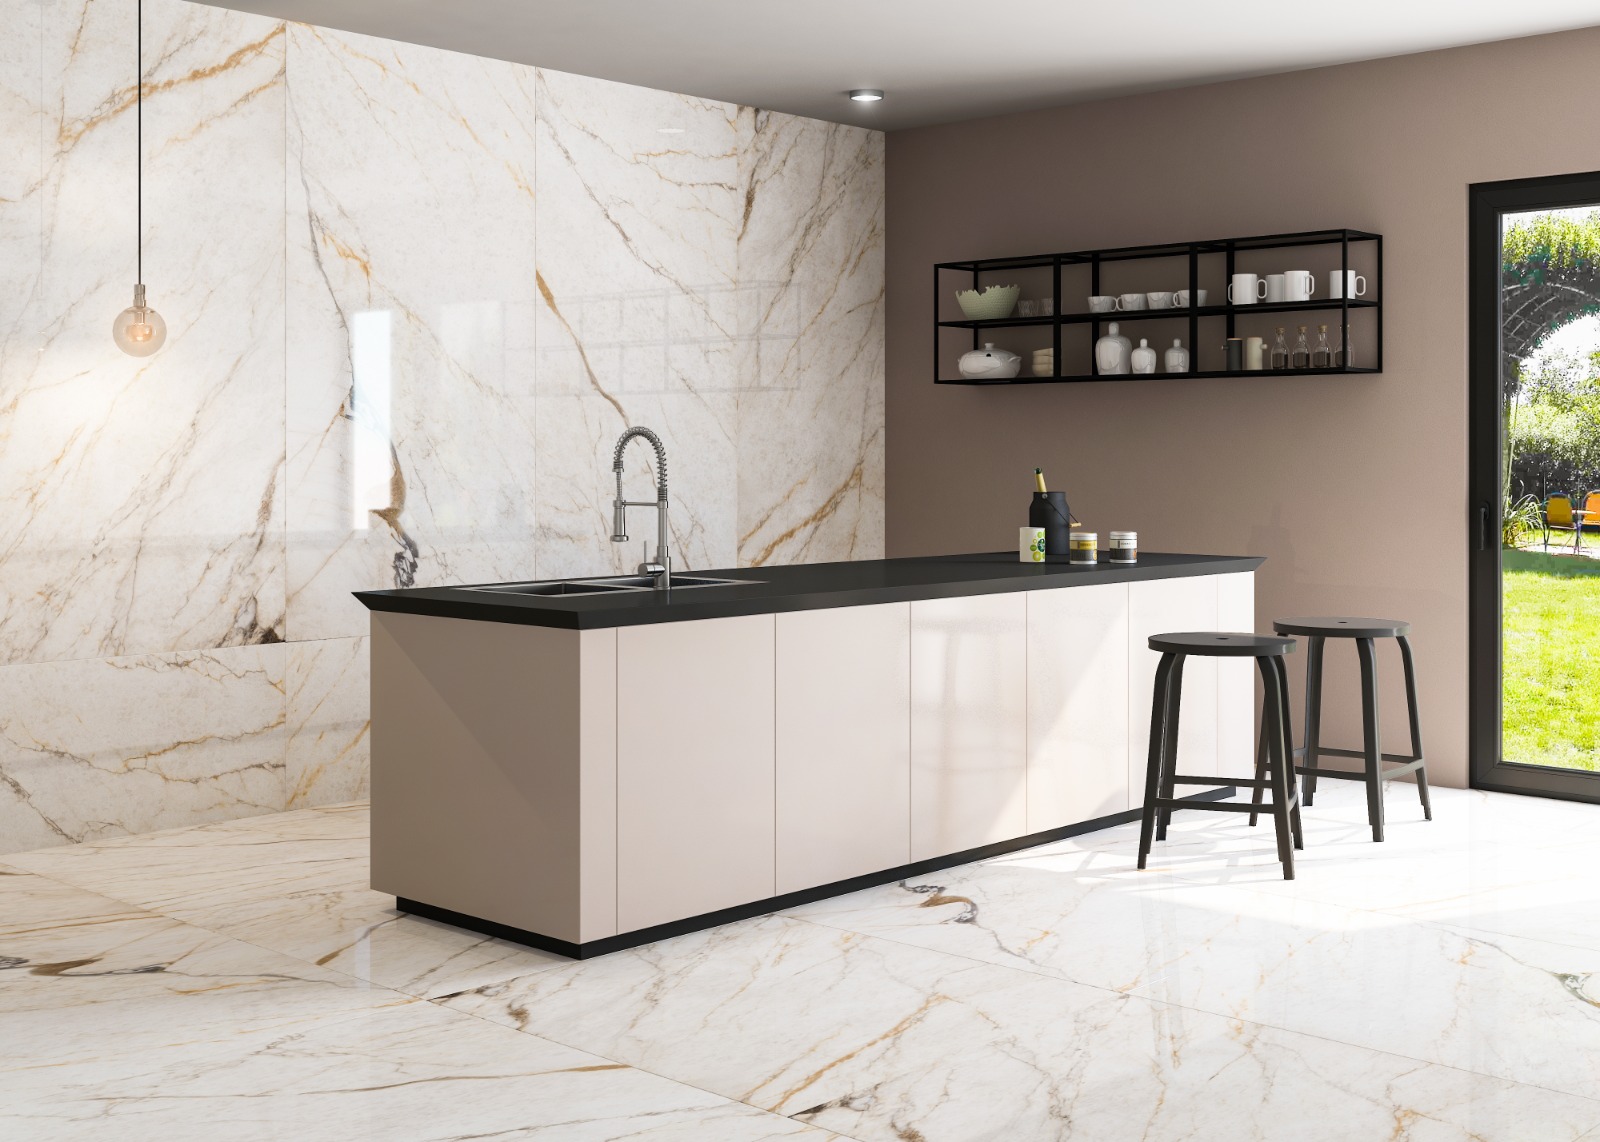 Bring Your Space To Life With Stone-Look Porcelain Tile